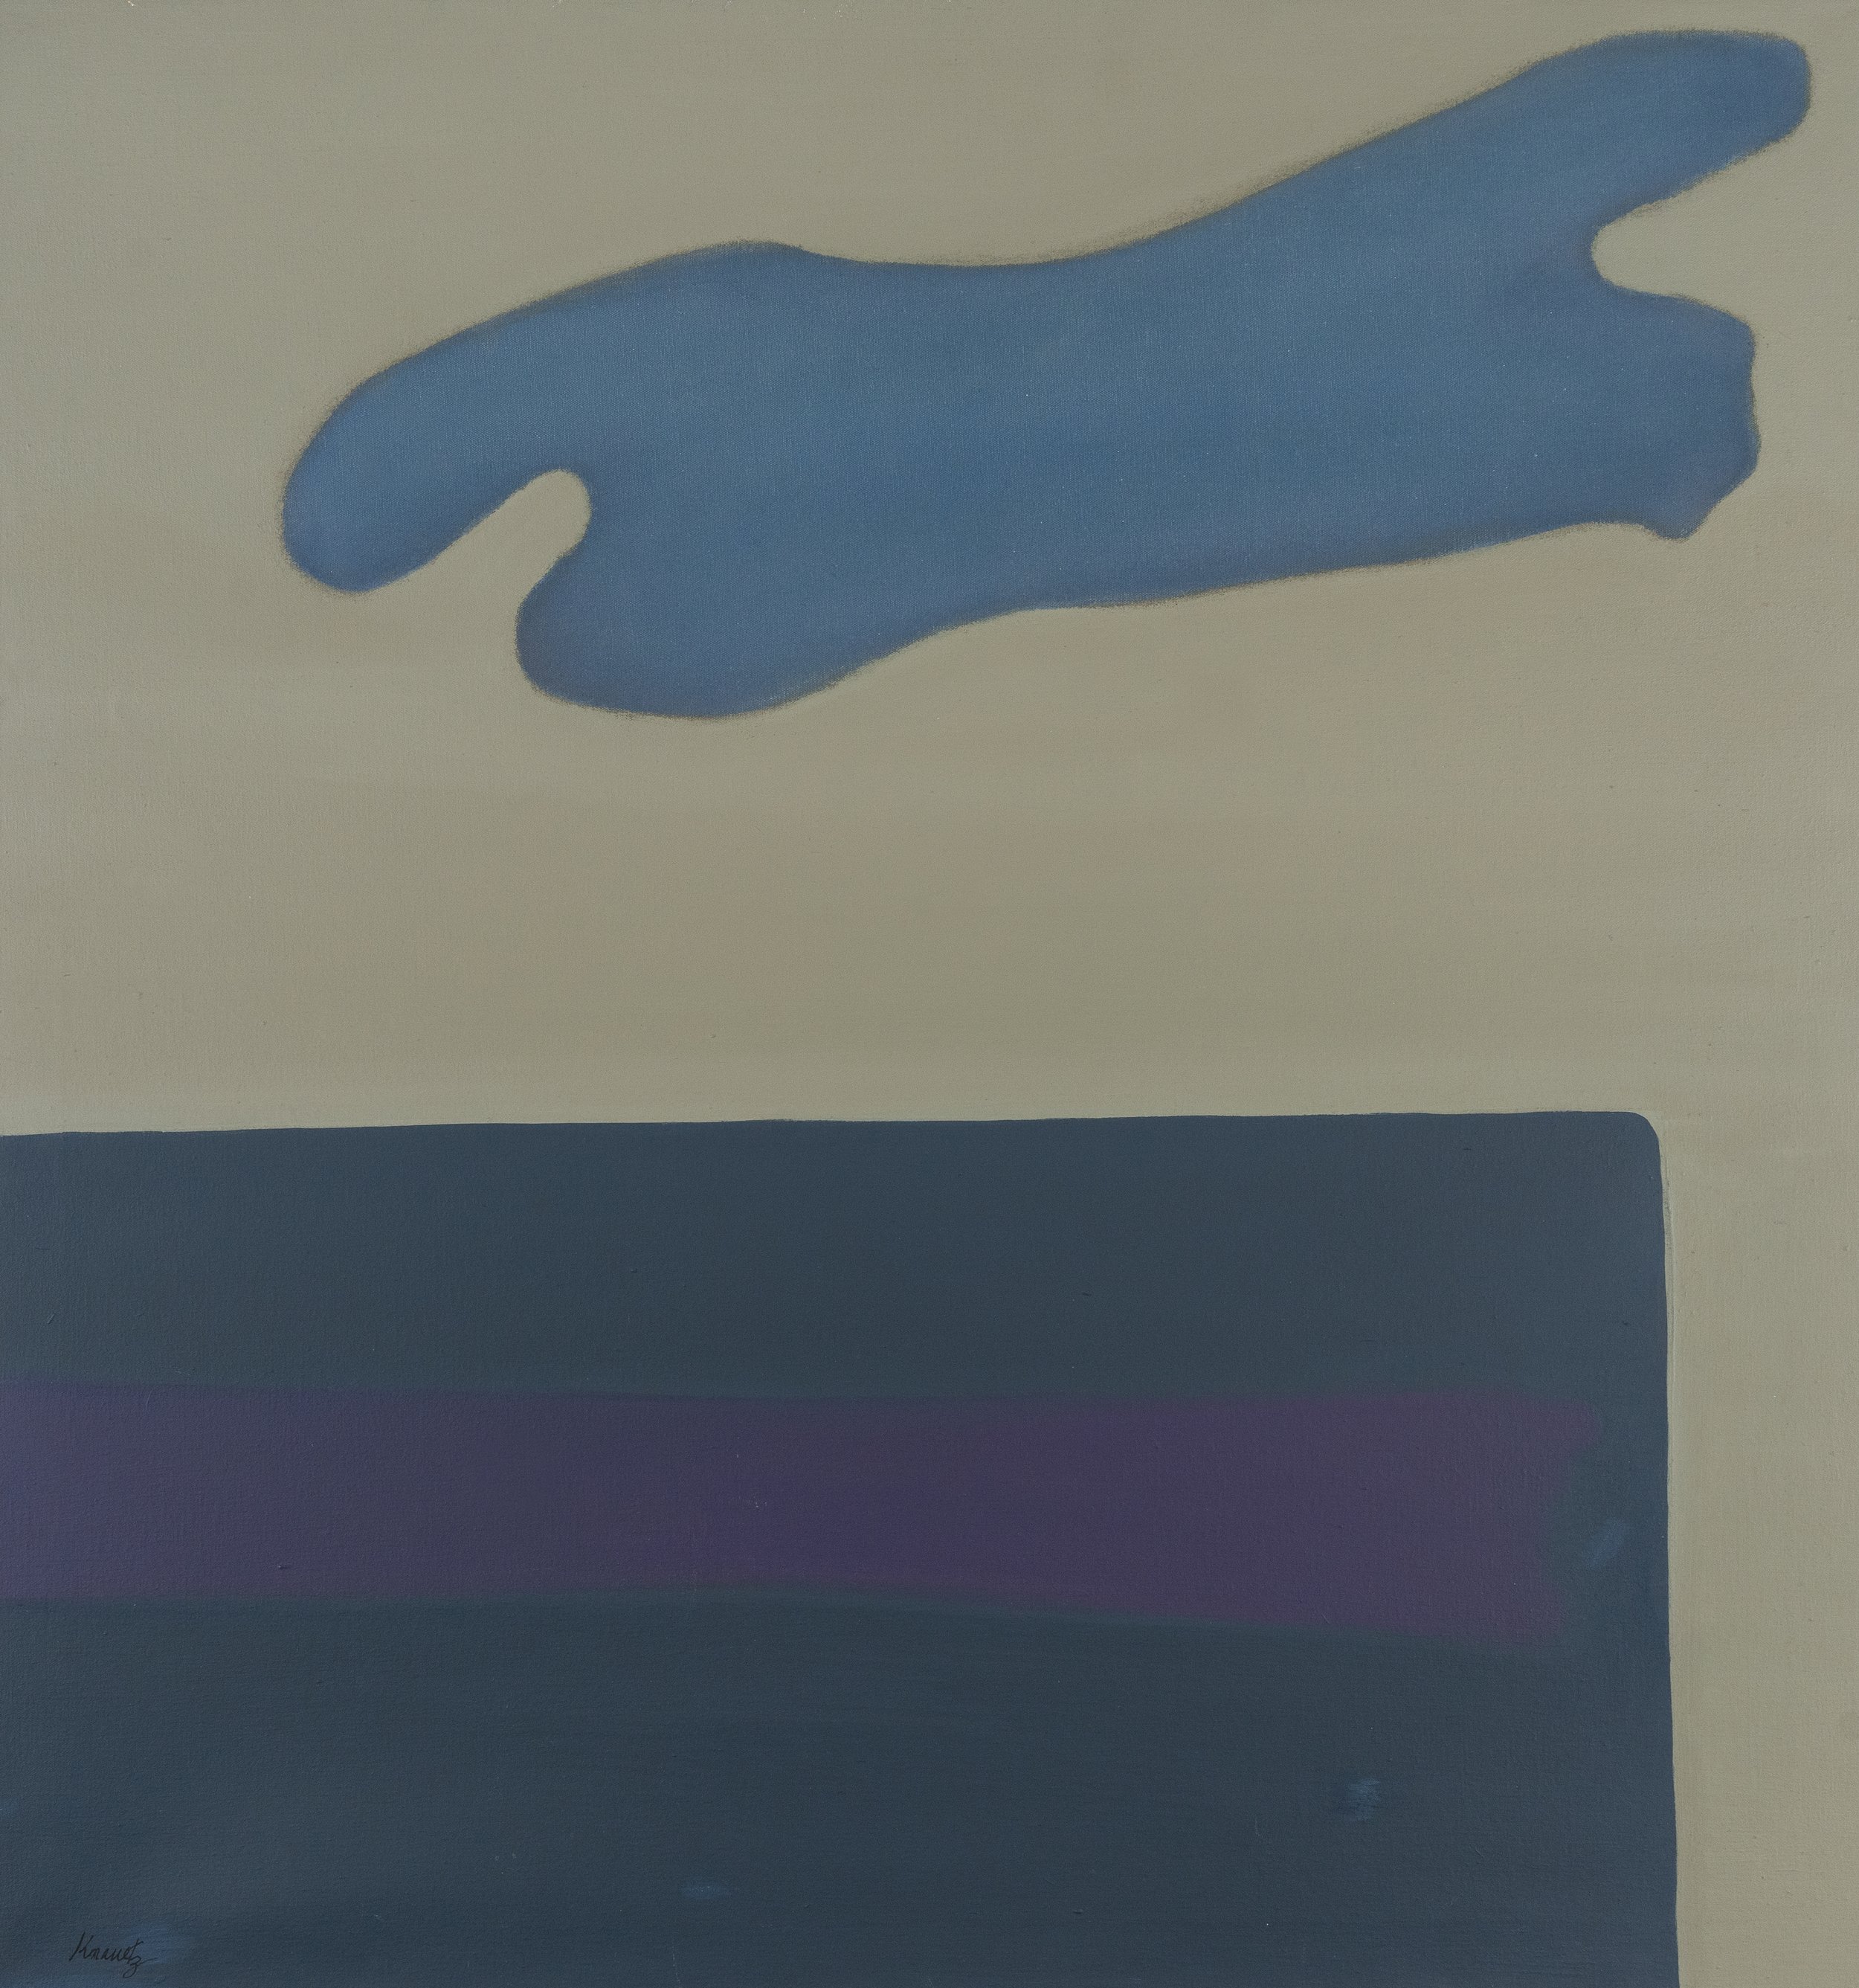 Floating Cloud, 1971, acrylic on canvas, 36x34 inches